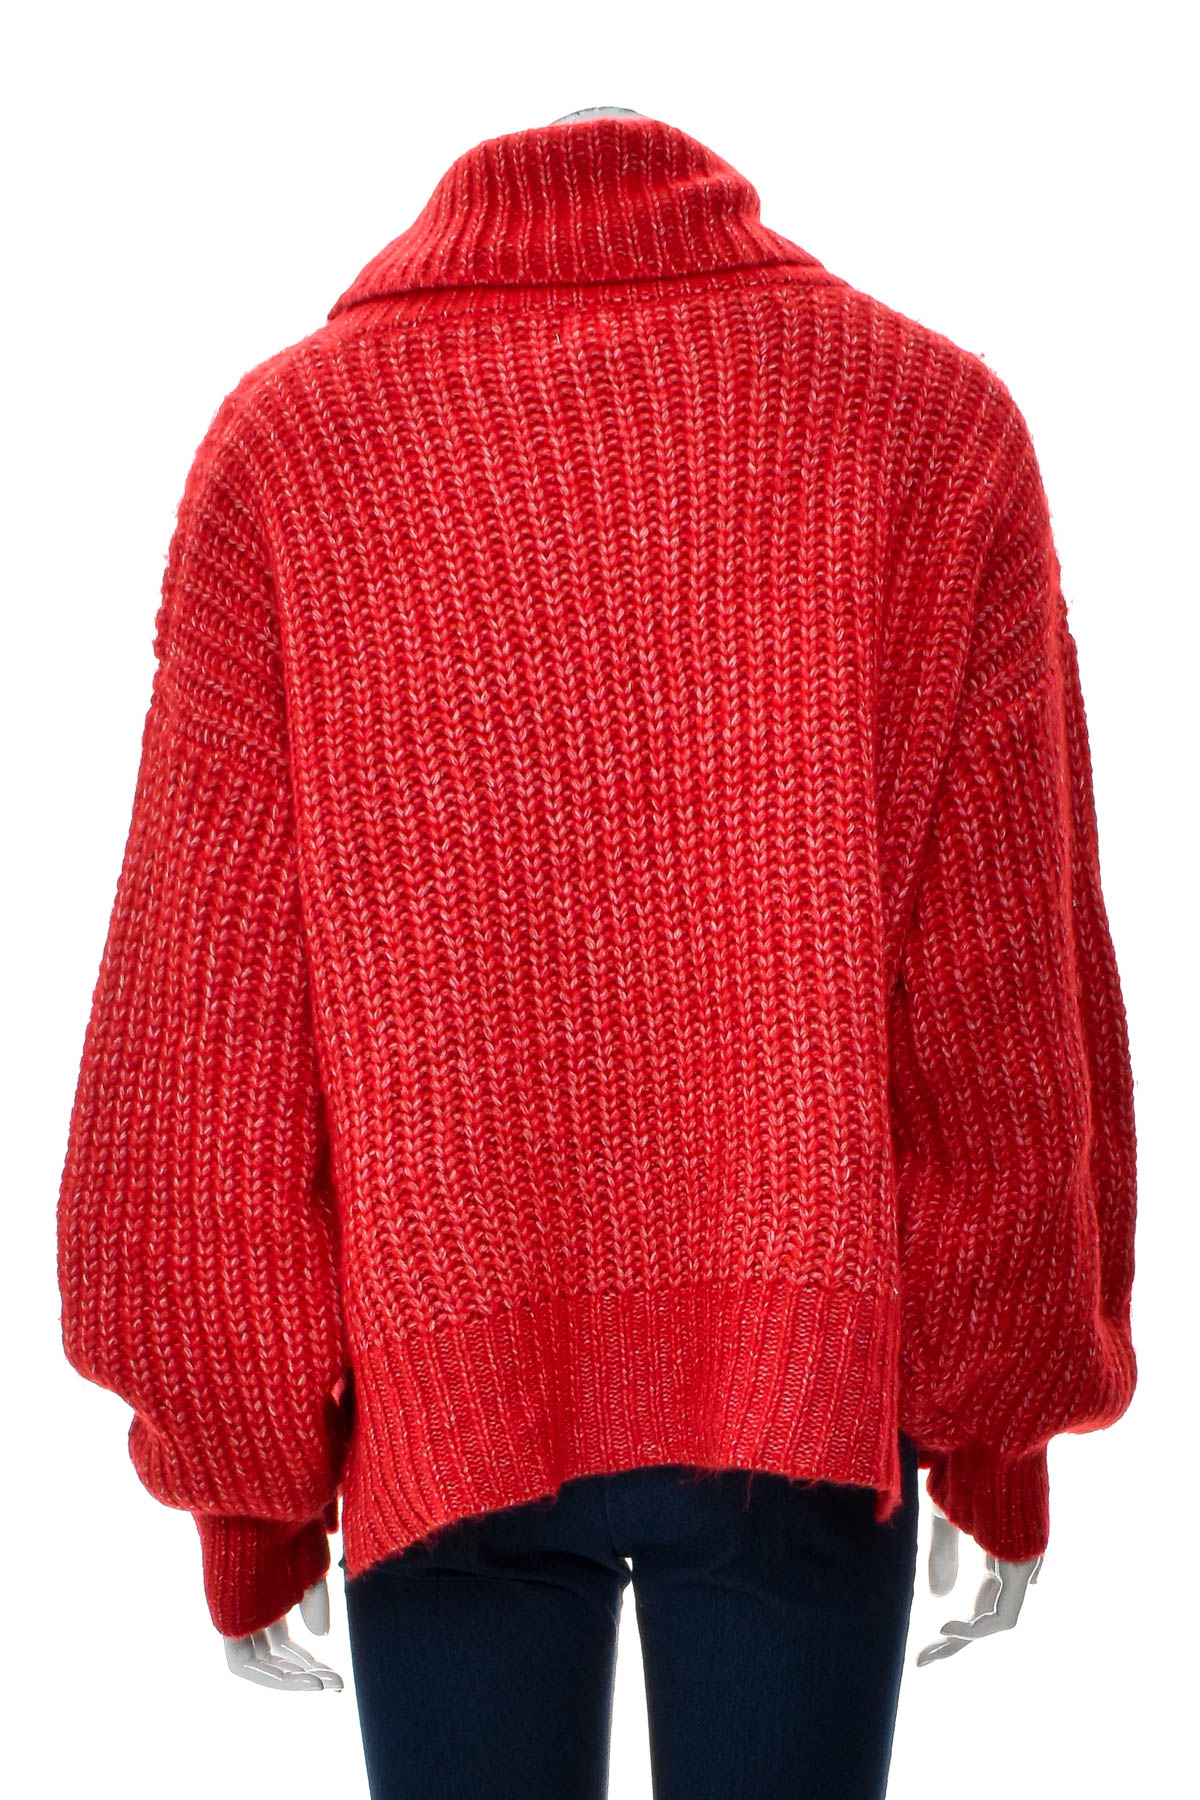 Women's sweater - a.new.day - 1